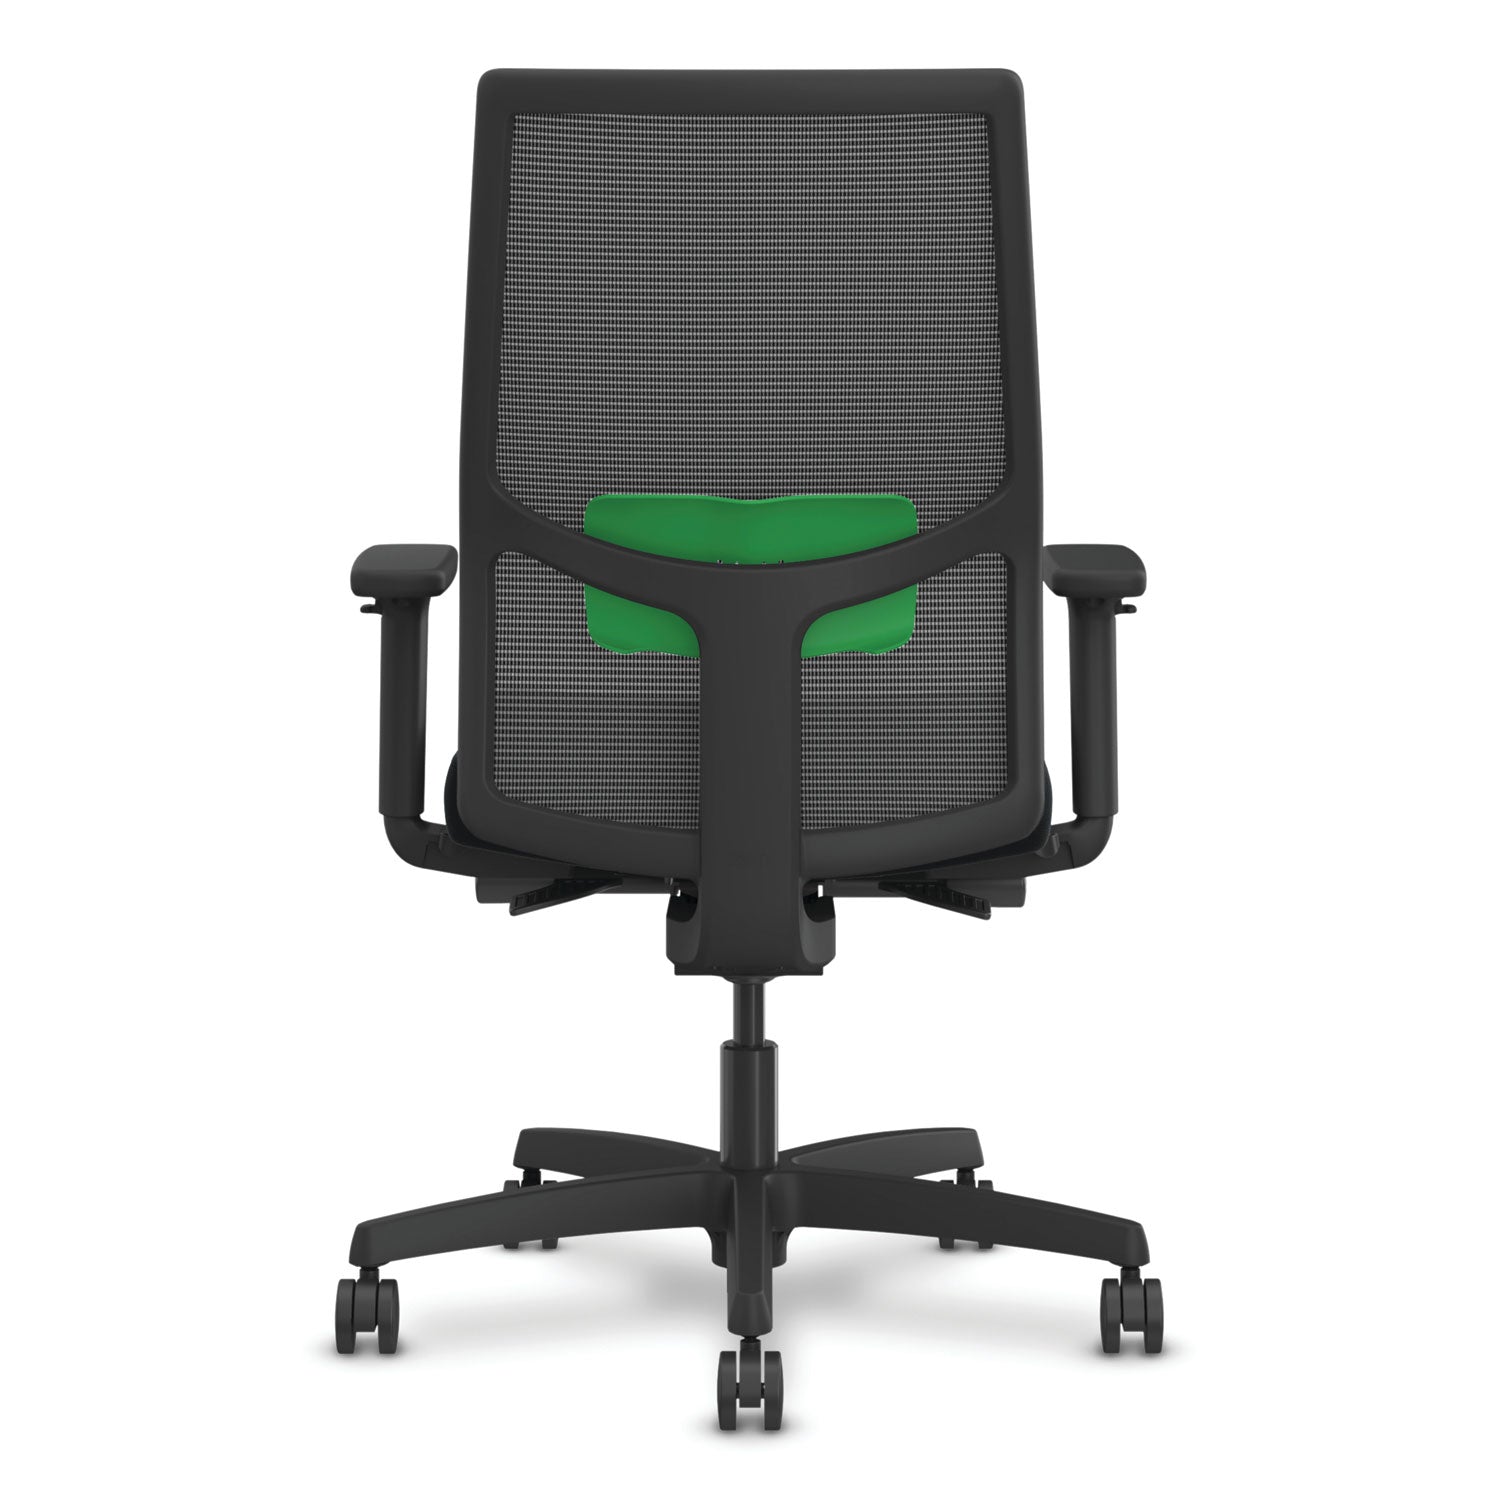 ignition-20-4-way-stretch-mid-back-task-chair-green-adjustable-lumbar-support-black-seat-back-base-ships-in-7-10-bus-days_honi2mm2amc10kt - 4